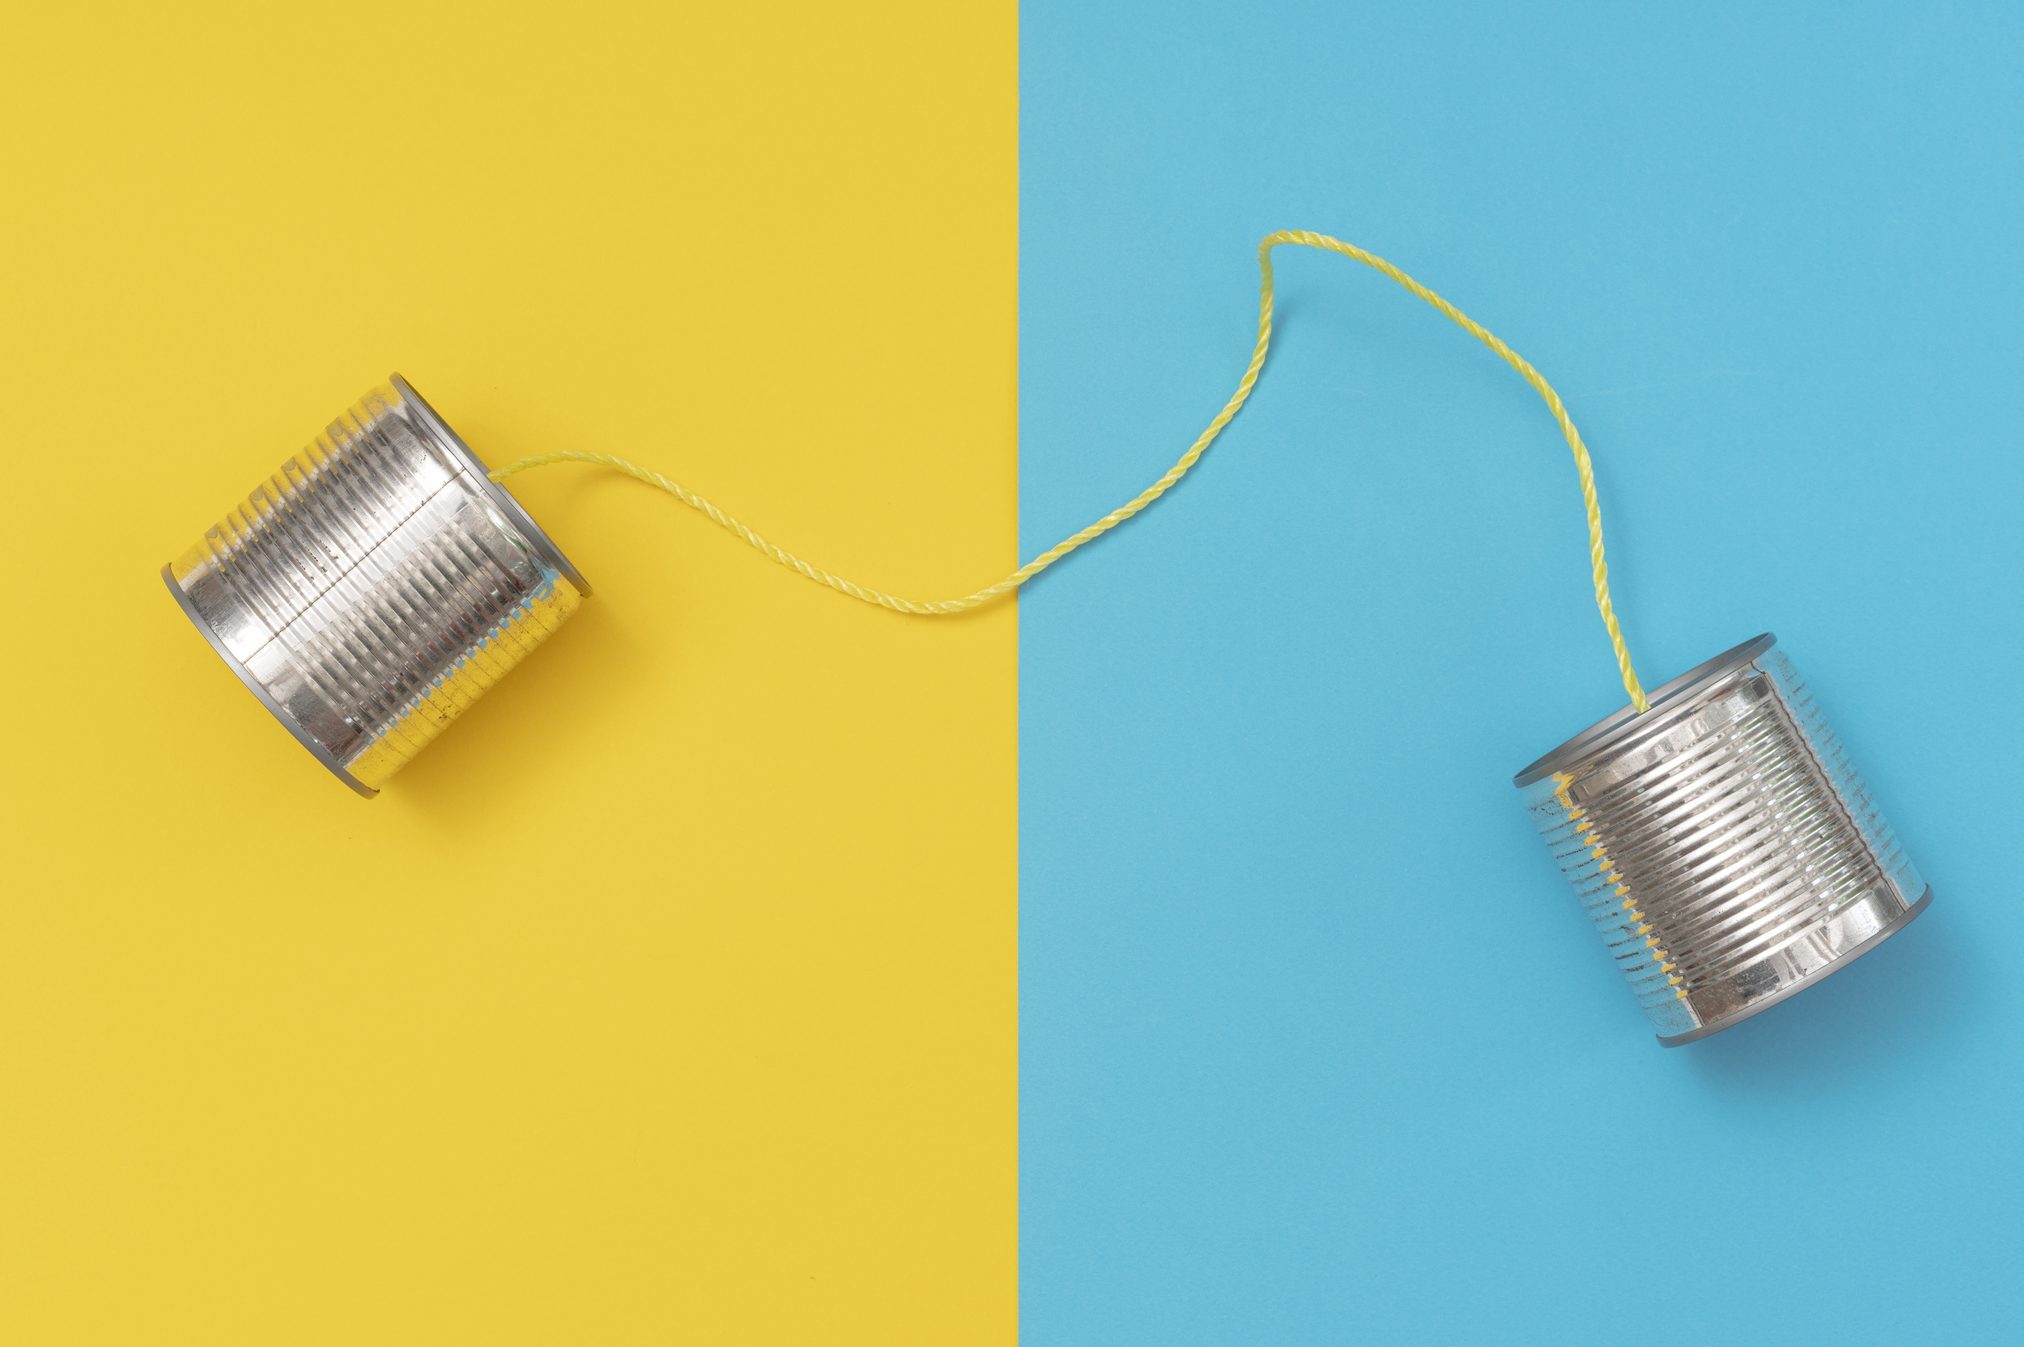 Tin can phone on yellow and blue paper backgrounds